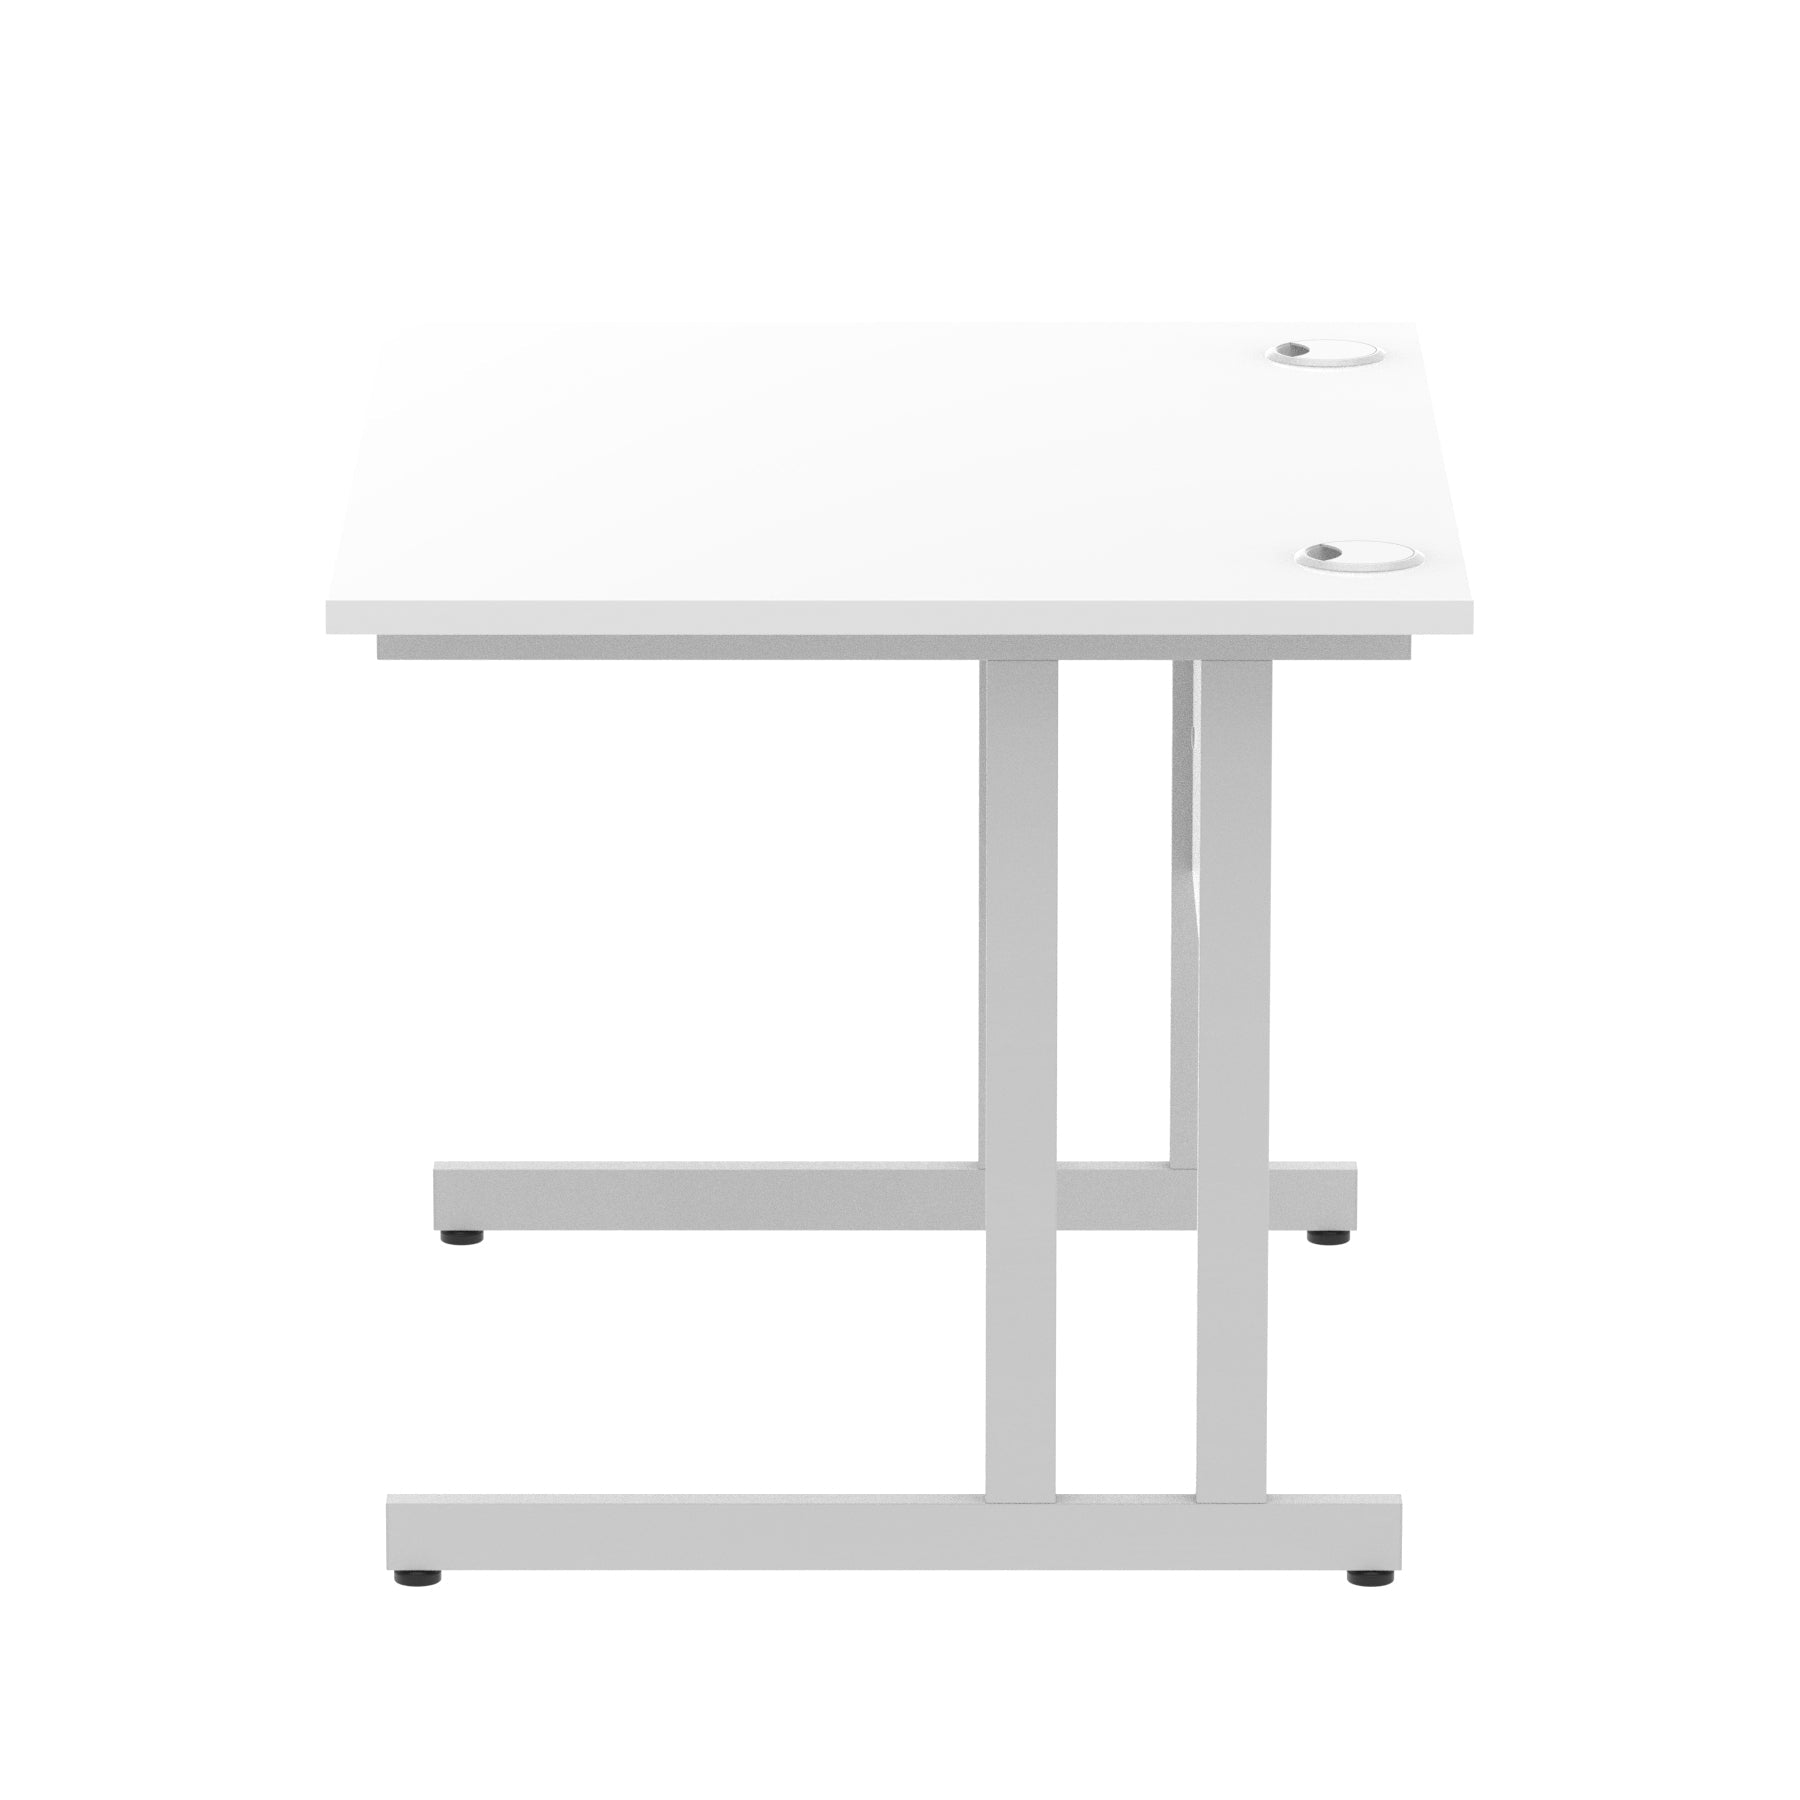 Impulse 1000mm Straight Desk Cantilever Leg - Rectangular MFC, Self-Assembly, 5-Year Guarantee, Silver/Black/White Frame, 1000x800 Top Size